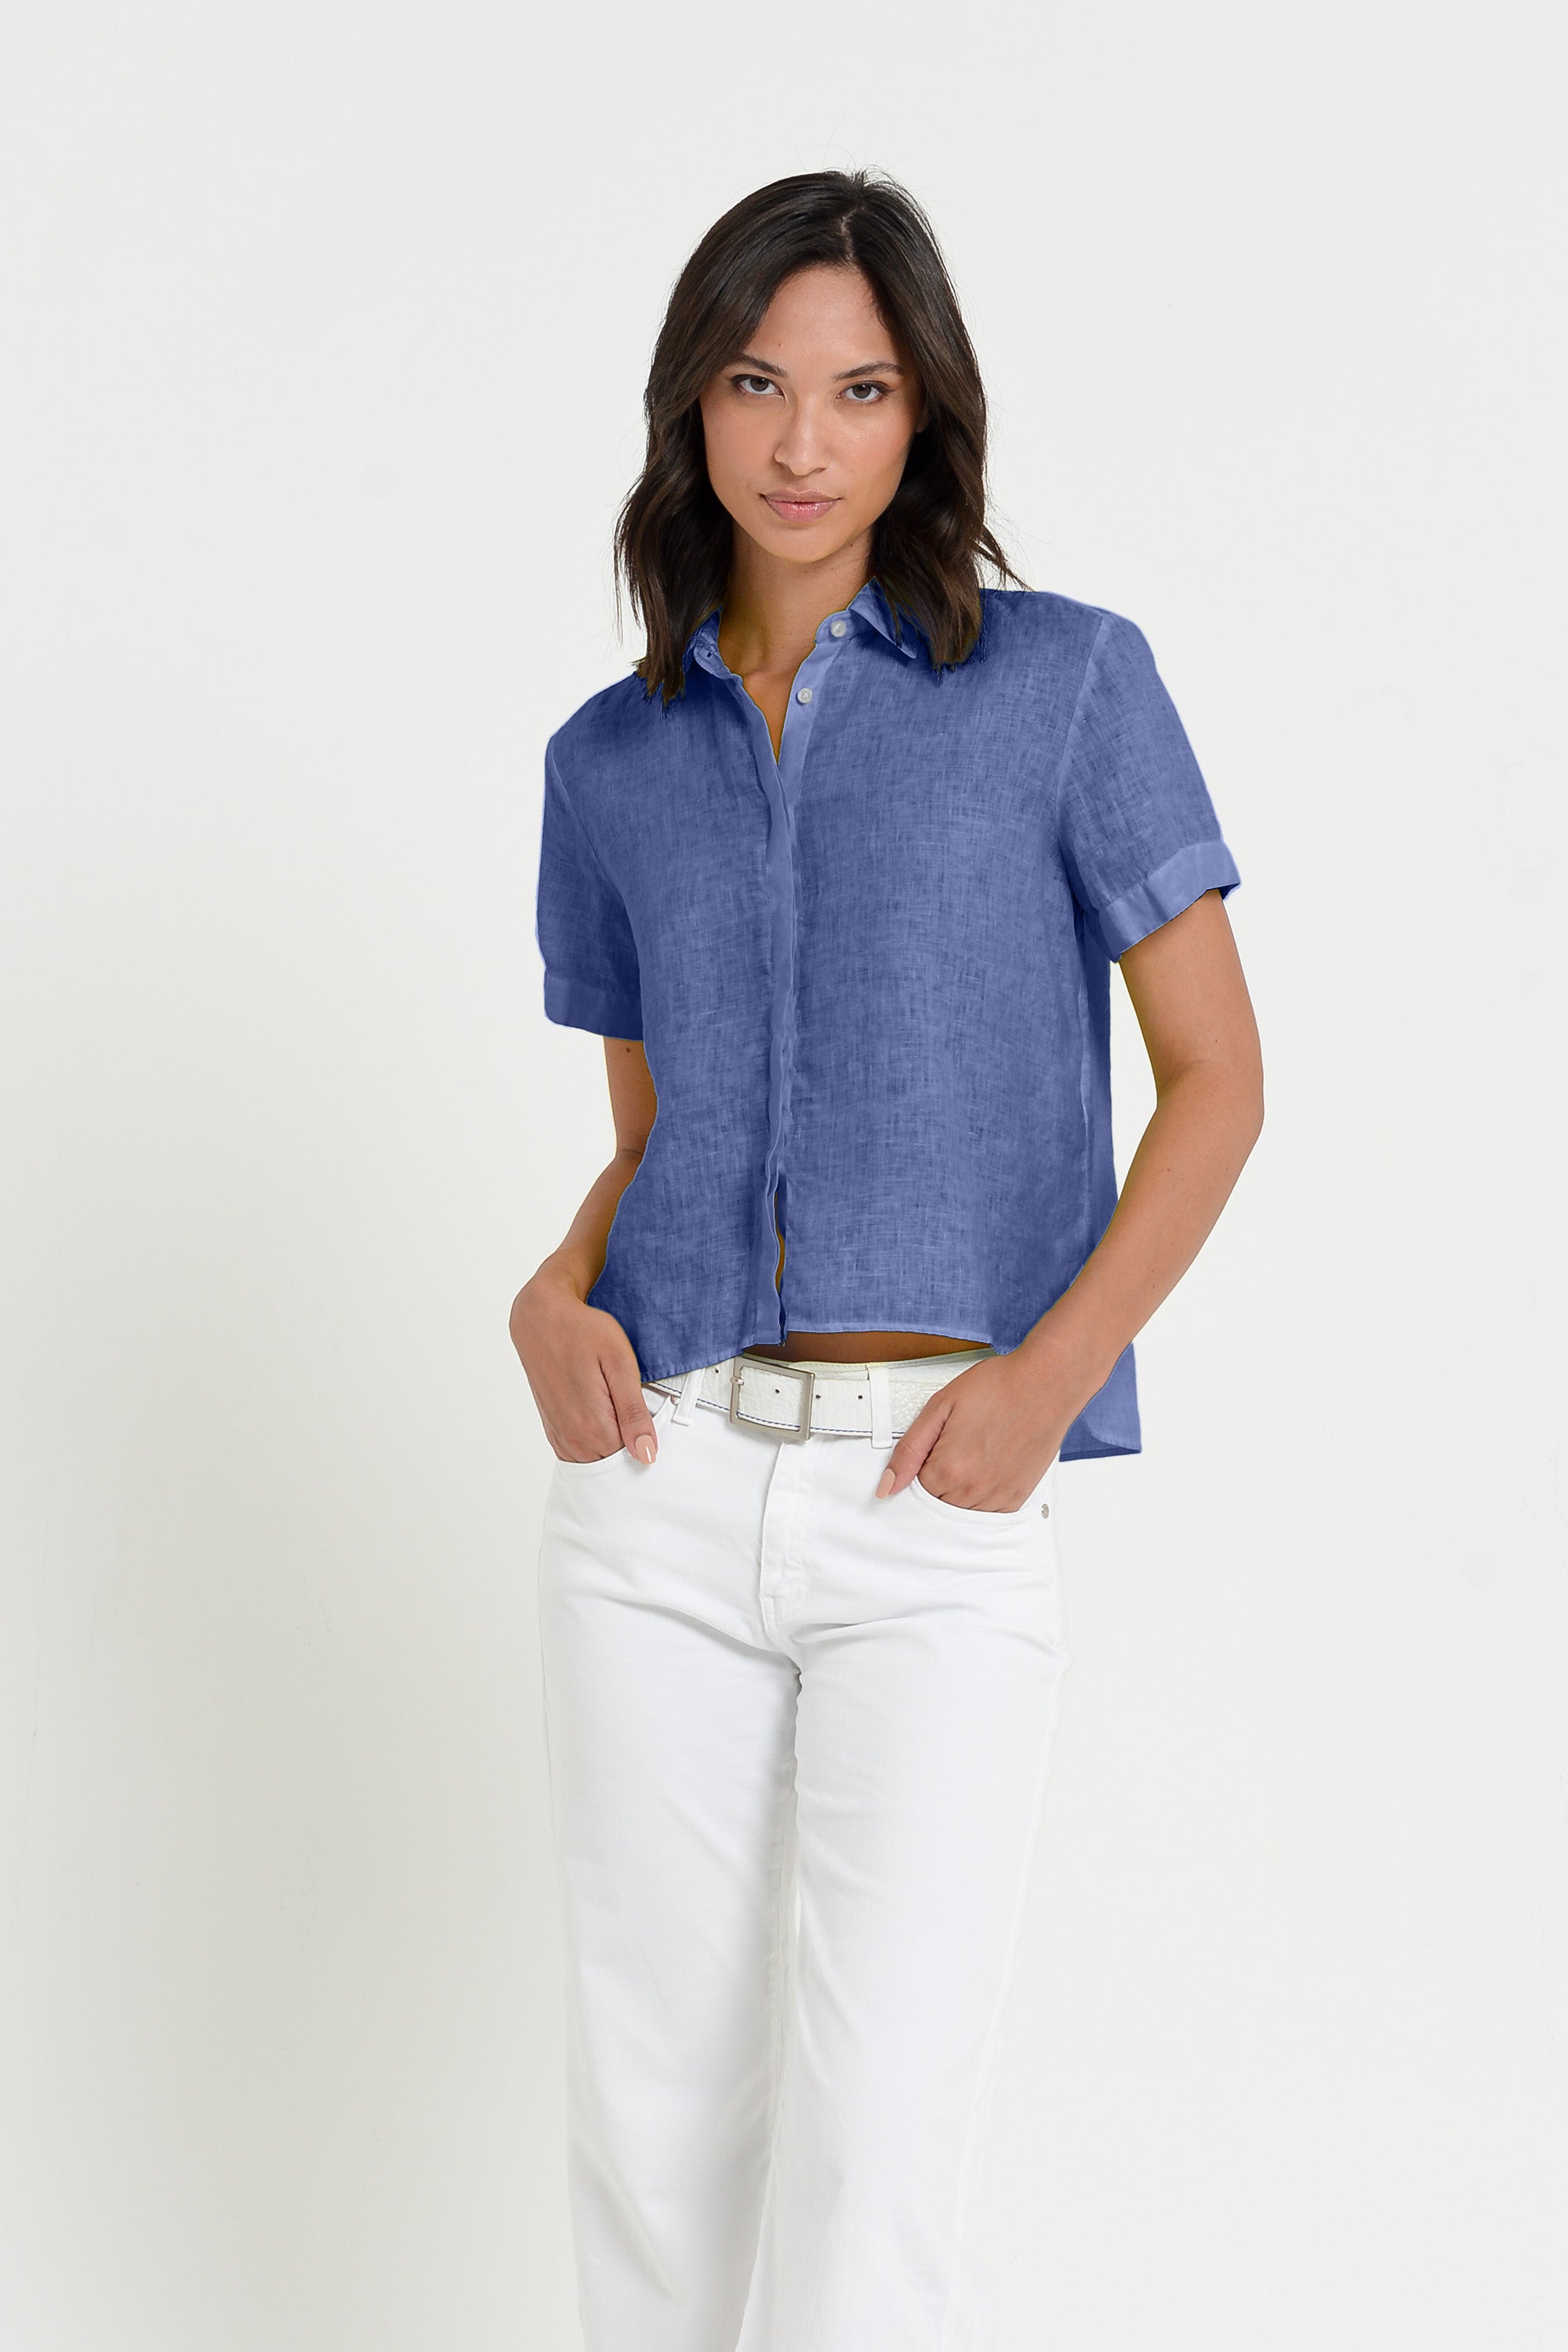 Sunray - Women's Cropped Shirt in Linen - Whale